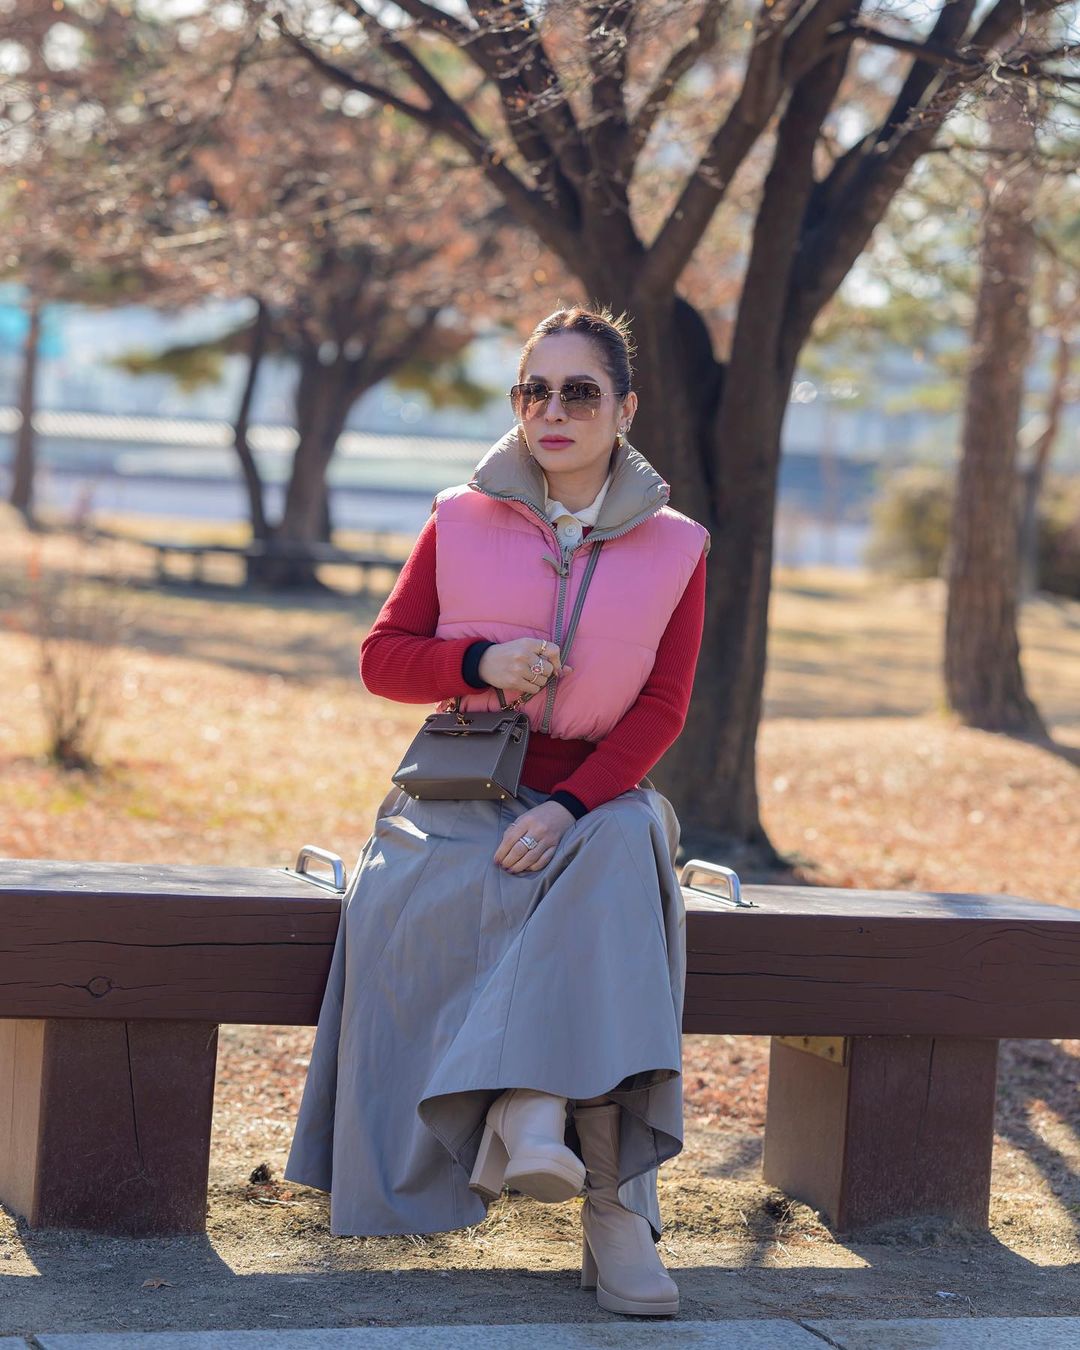 Look: Jinkee Pacquiao's Designer Outfits In Seoul, South Korea